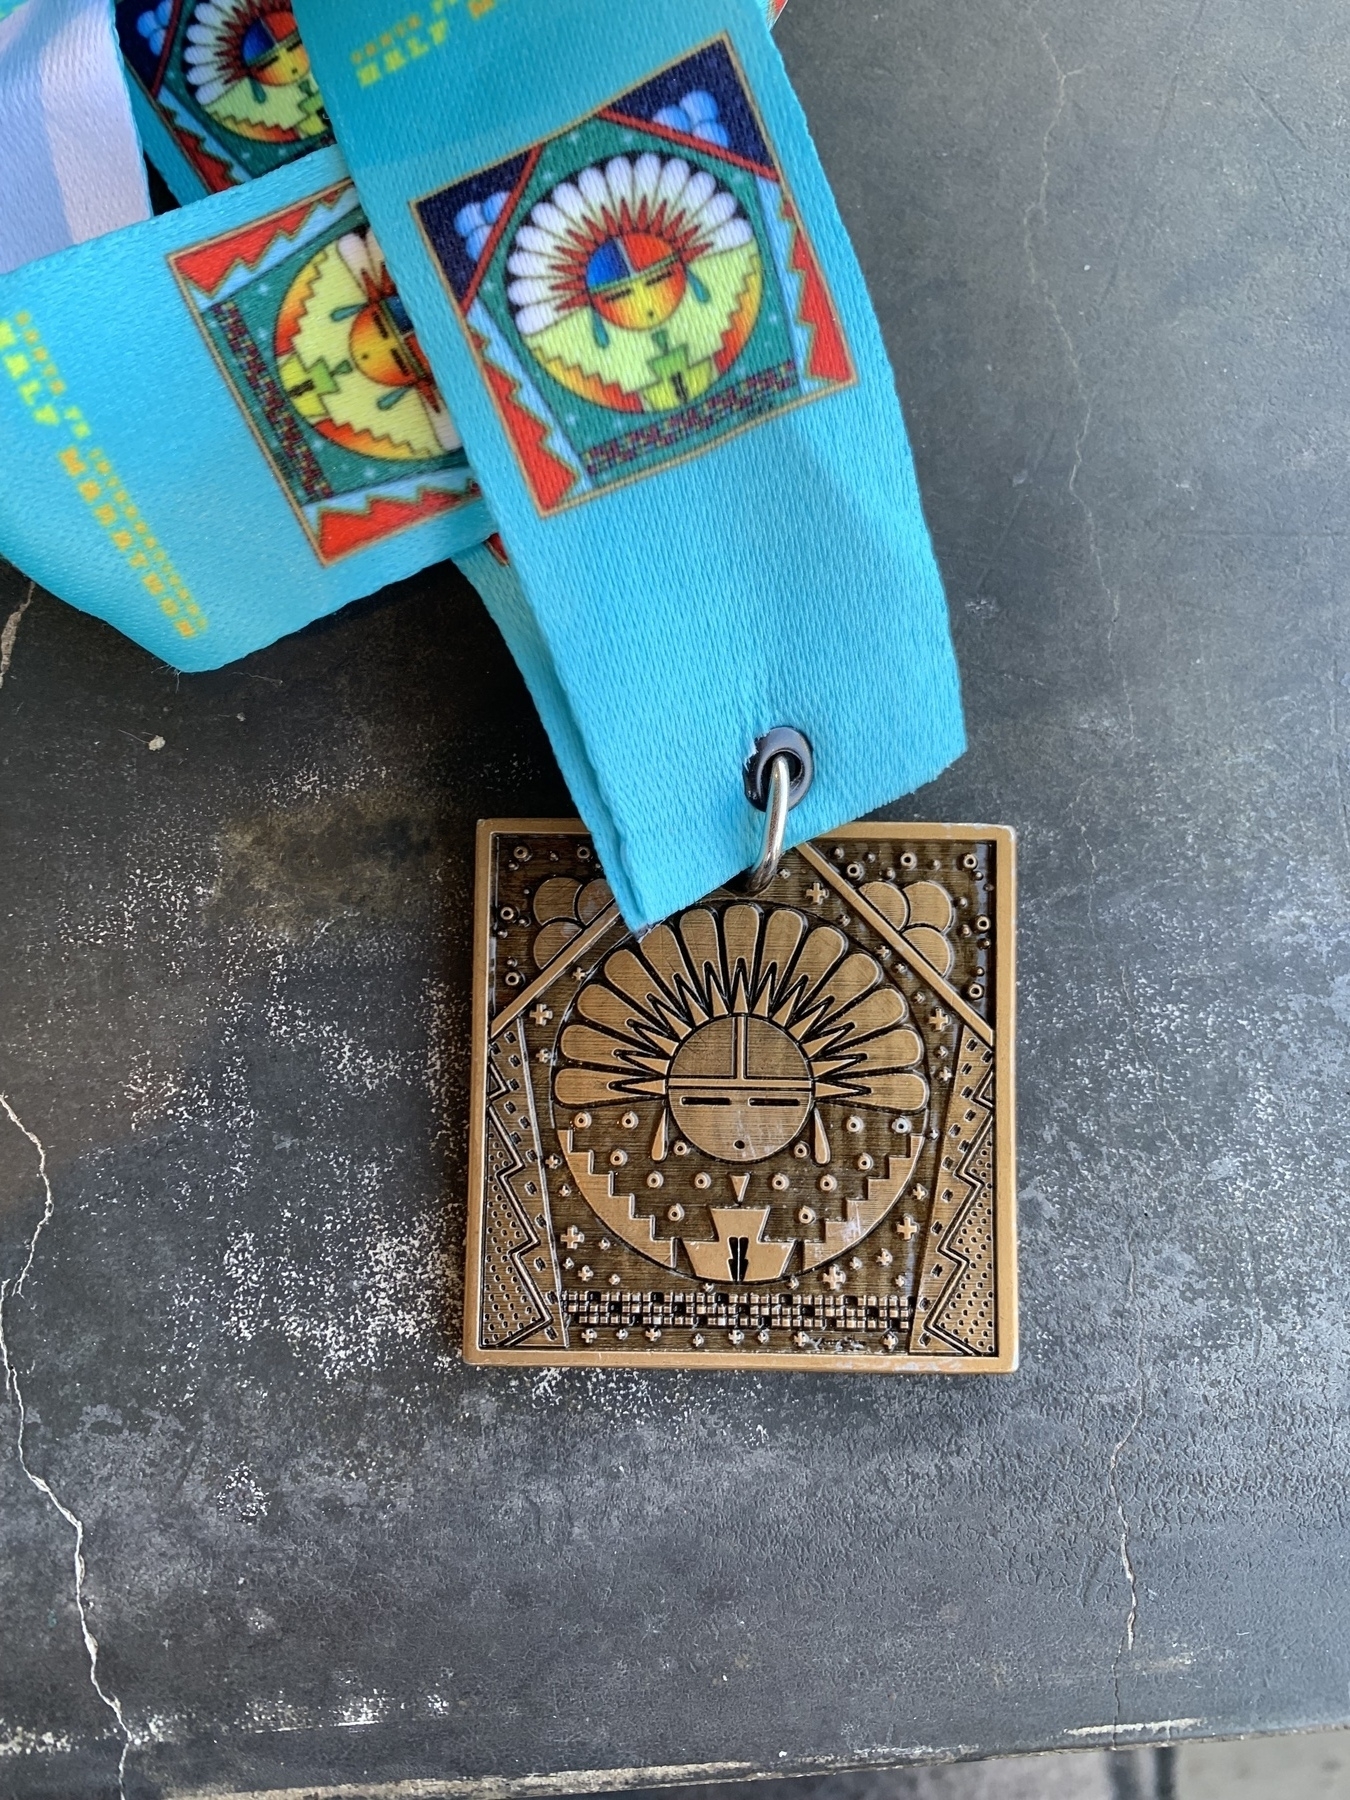 Sun face insignia on medal with turquoise lanyard